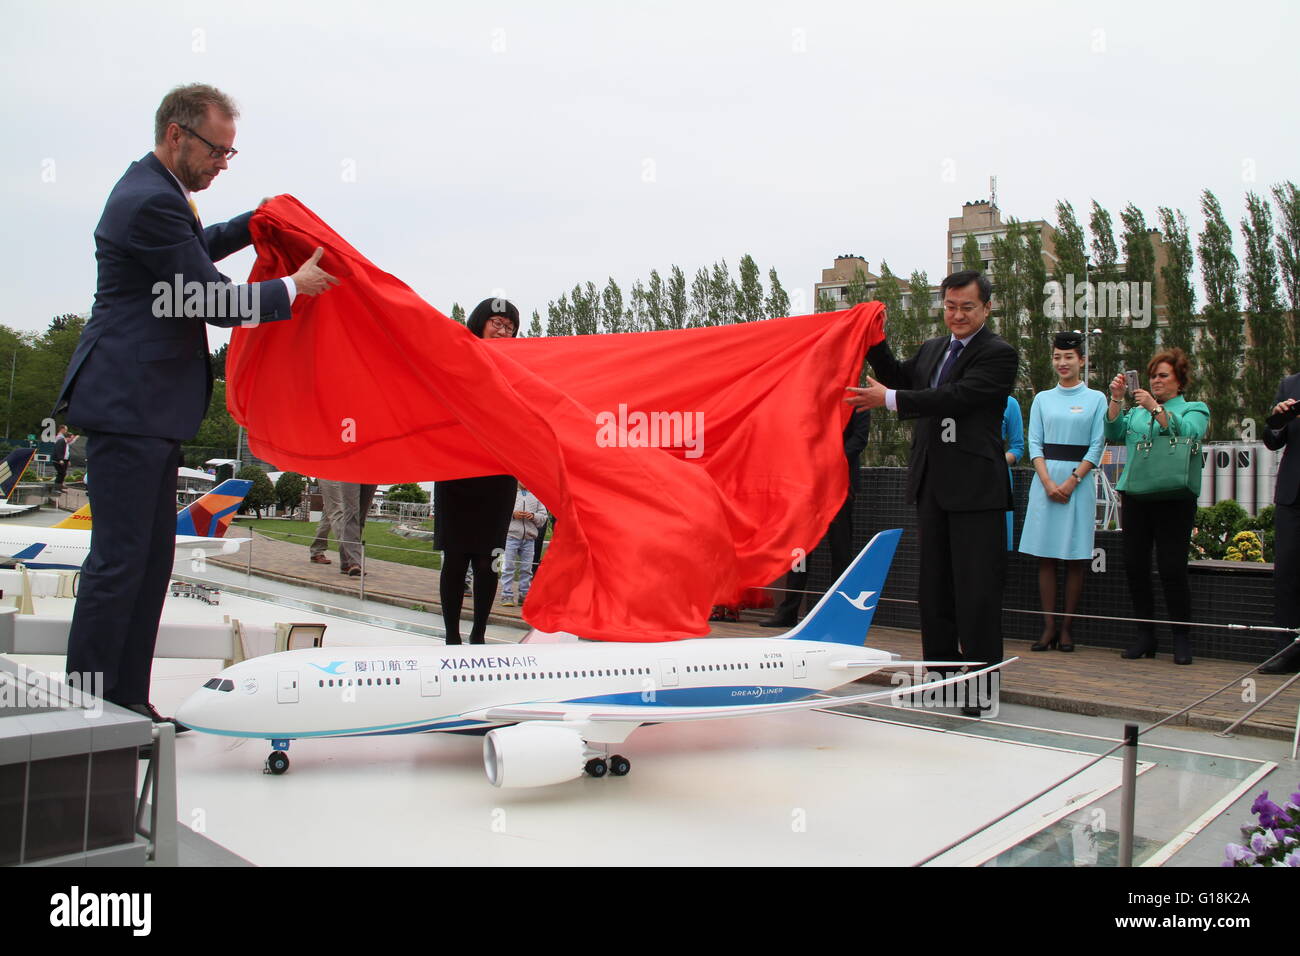 (160510) -- HAGUE, May 10, 2016 (Xinhua) -- Jos Vranken (L), director of the Netherlands Board of Tourism and Conventions (NBTC) and Li Fei (R), economic counsellor of the Chinese Embassy in the Netherlands, unveil the miniature plane of Xiamen Airlines in Madurodam in The Hague, the Netherlands, May 10, 2016. A miniature plane of China's Xiamen Airlines was revealed on Tuesday in Madurodam, one of the most famous Dutch tourist attractions located in The Hague, an event highlighting the great potential of both the Chinese tourist market for the Netherlands and the cooperation between Chinese a Stock Photo